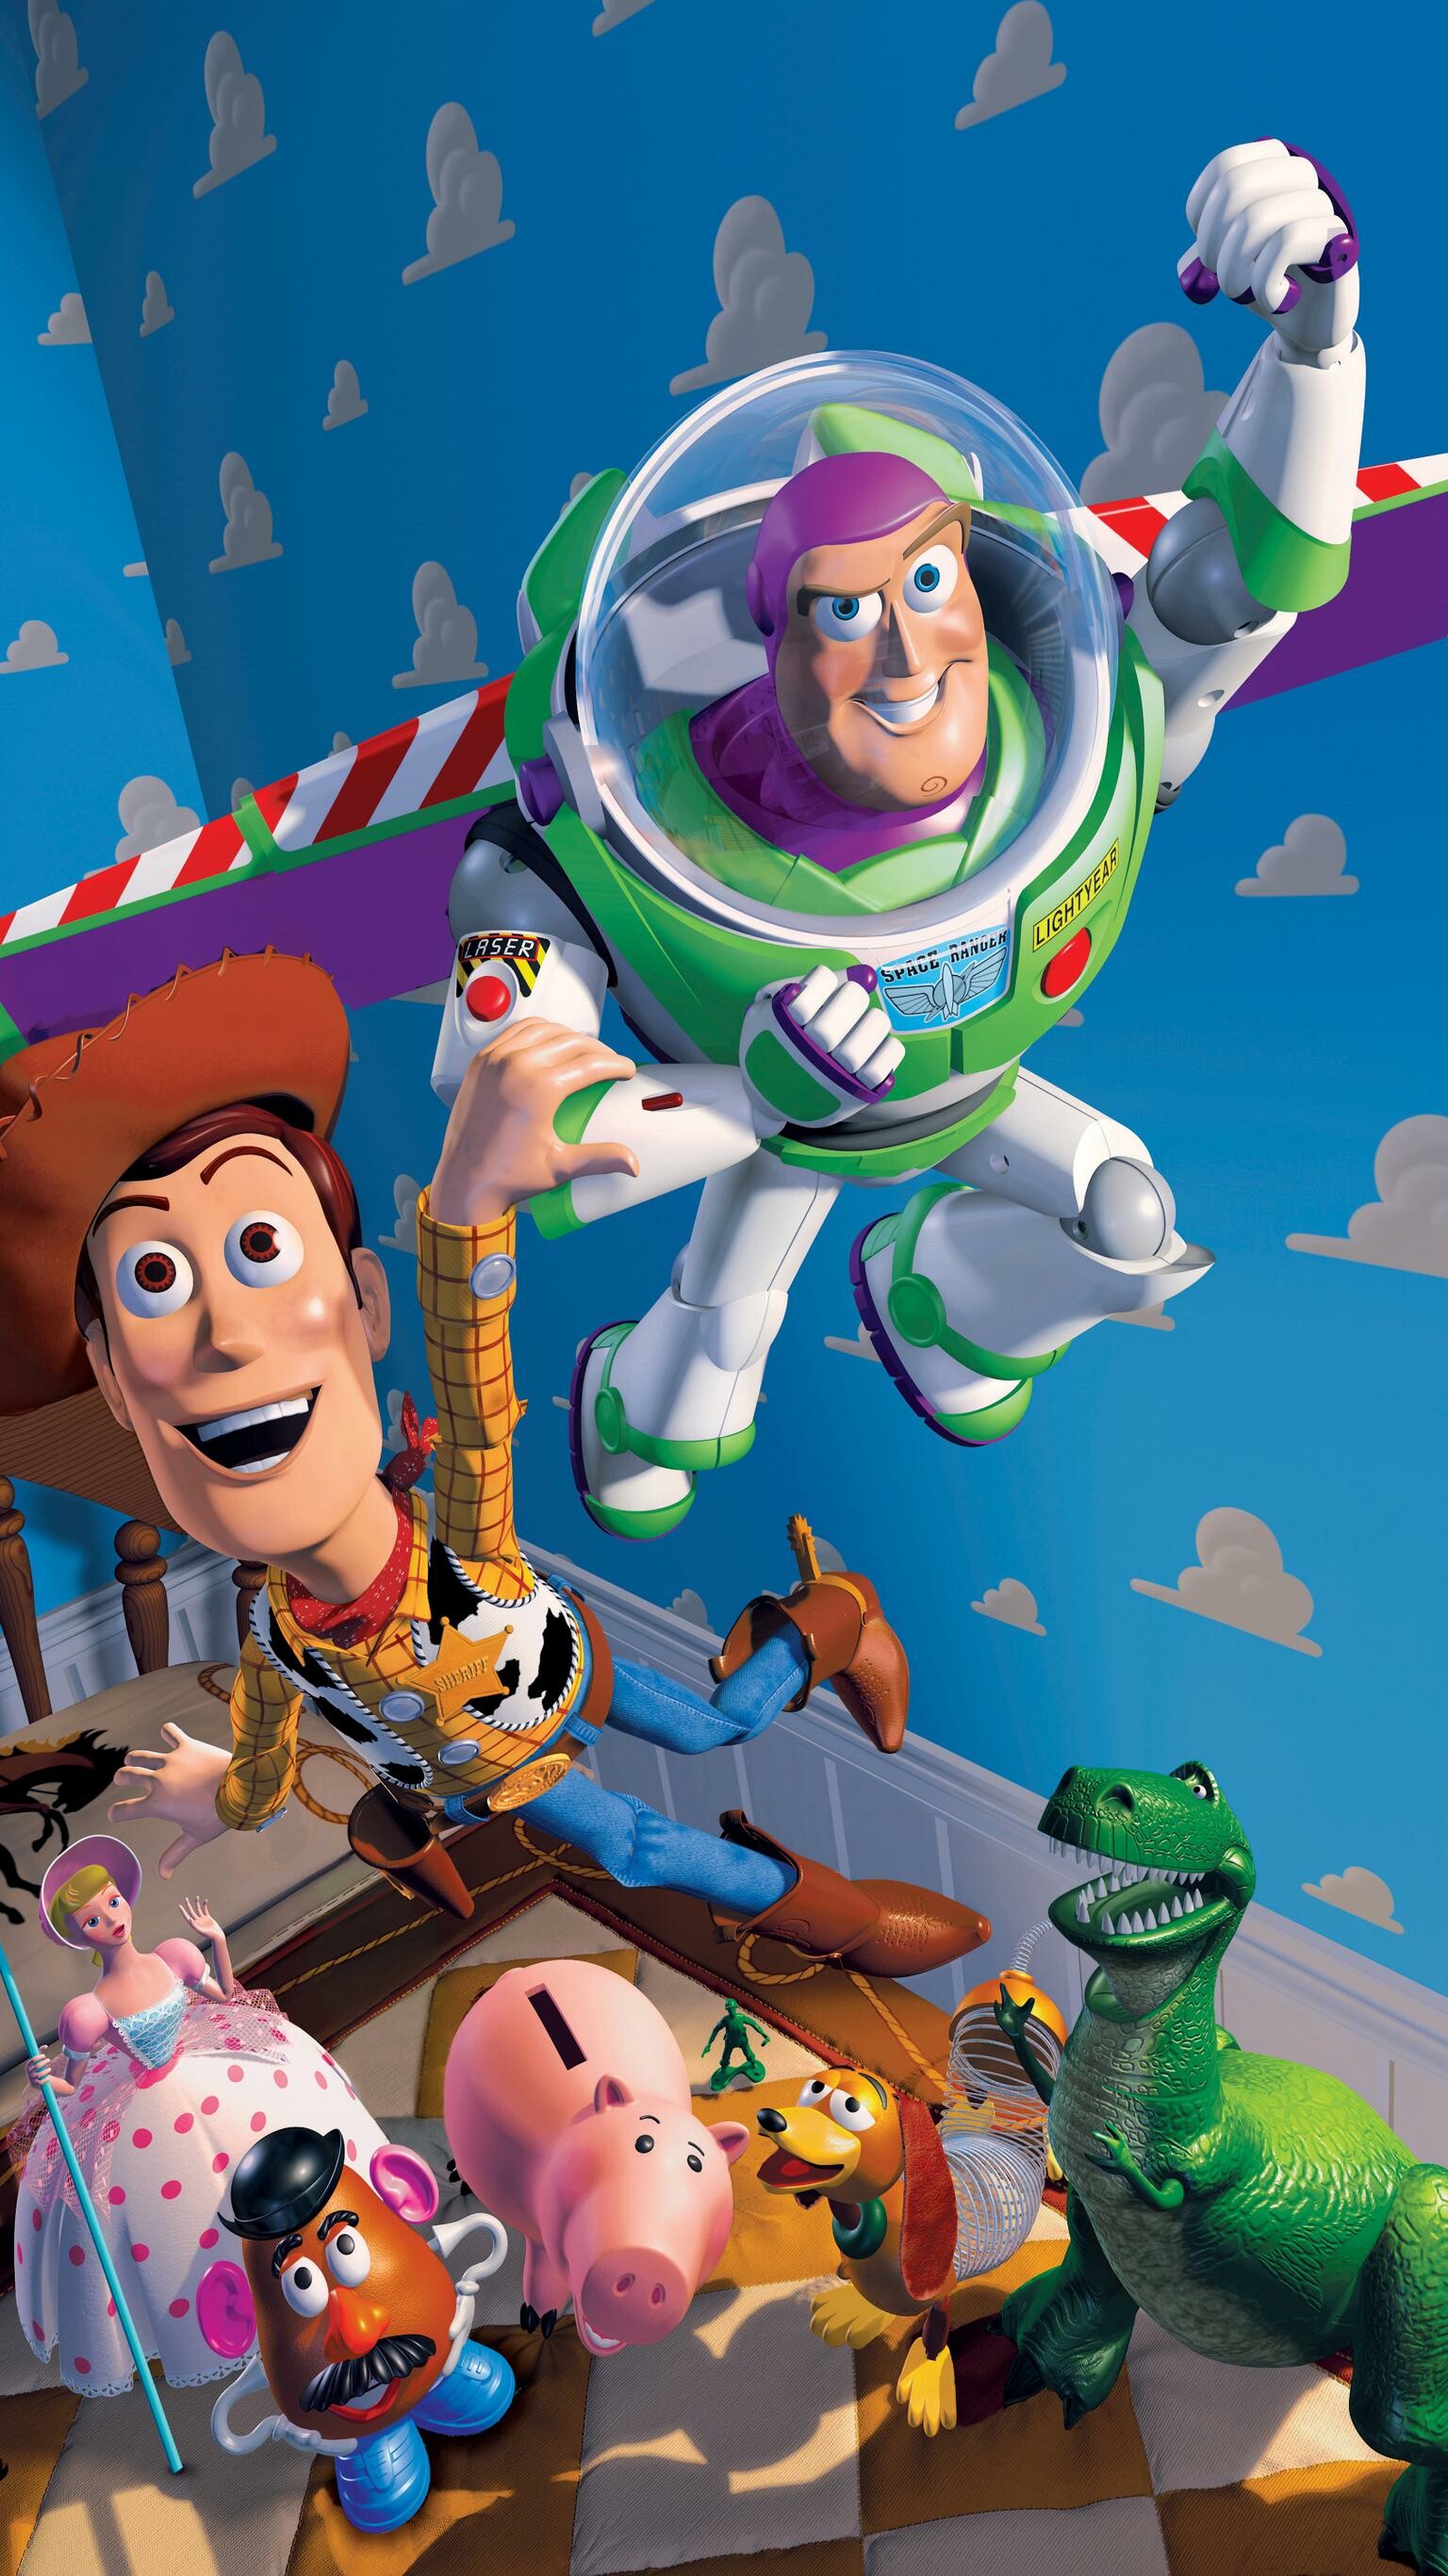 Toy Story: A 1995 American computer-animated comedy film directed by John Lasseter. 1540x2740 HD Wallpaper.